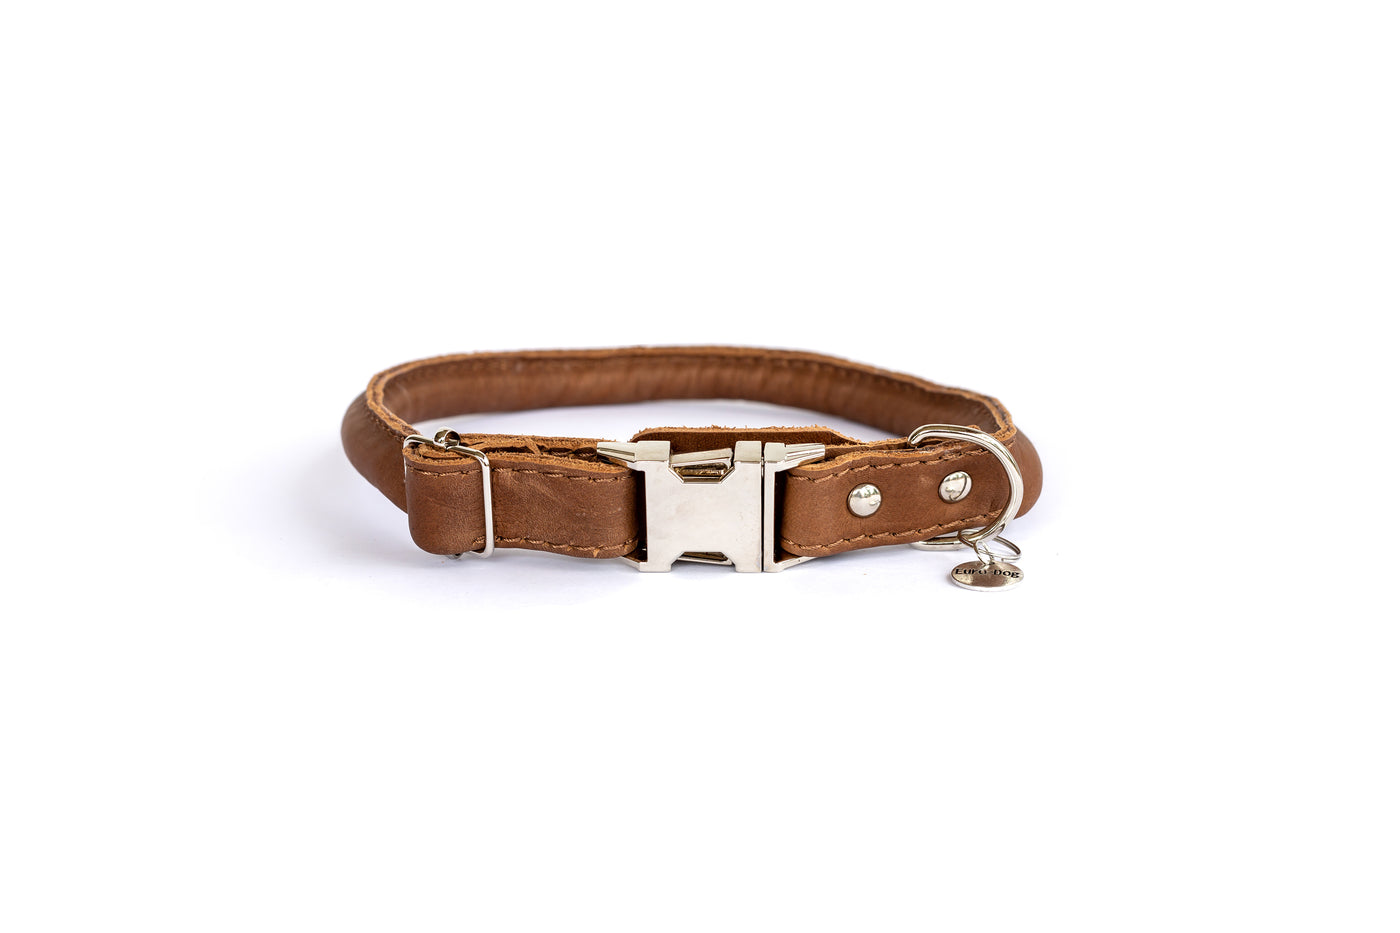 Euro Dog Soft Rolled Leather Dog Collar Quick Release Buckle Made in USA Affordable Luxury